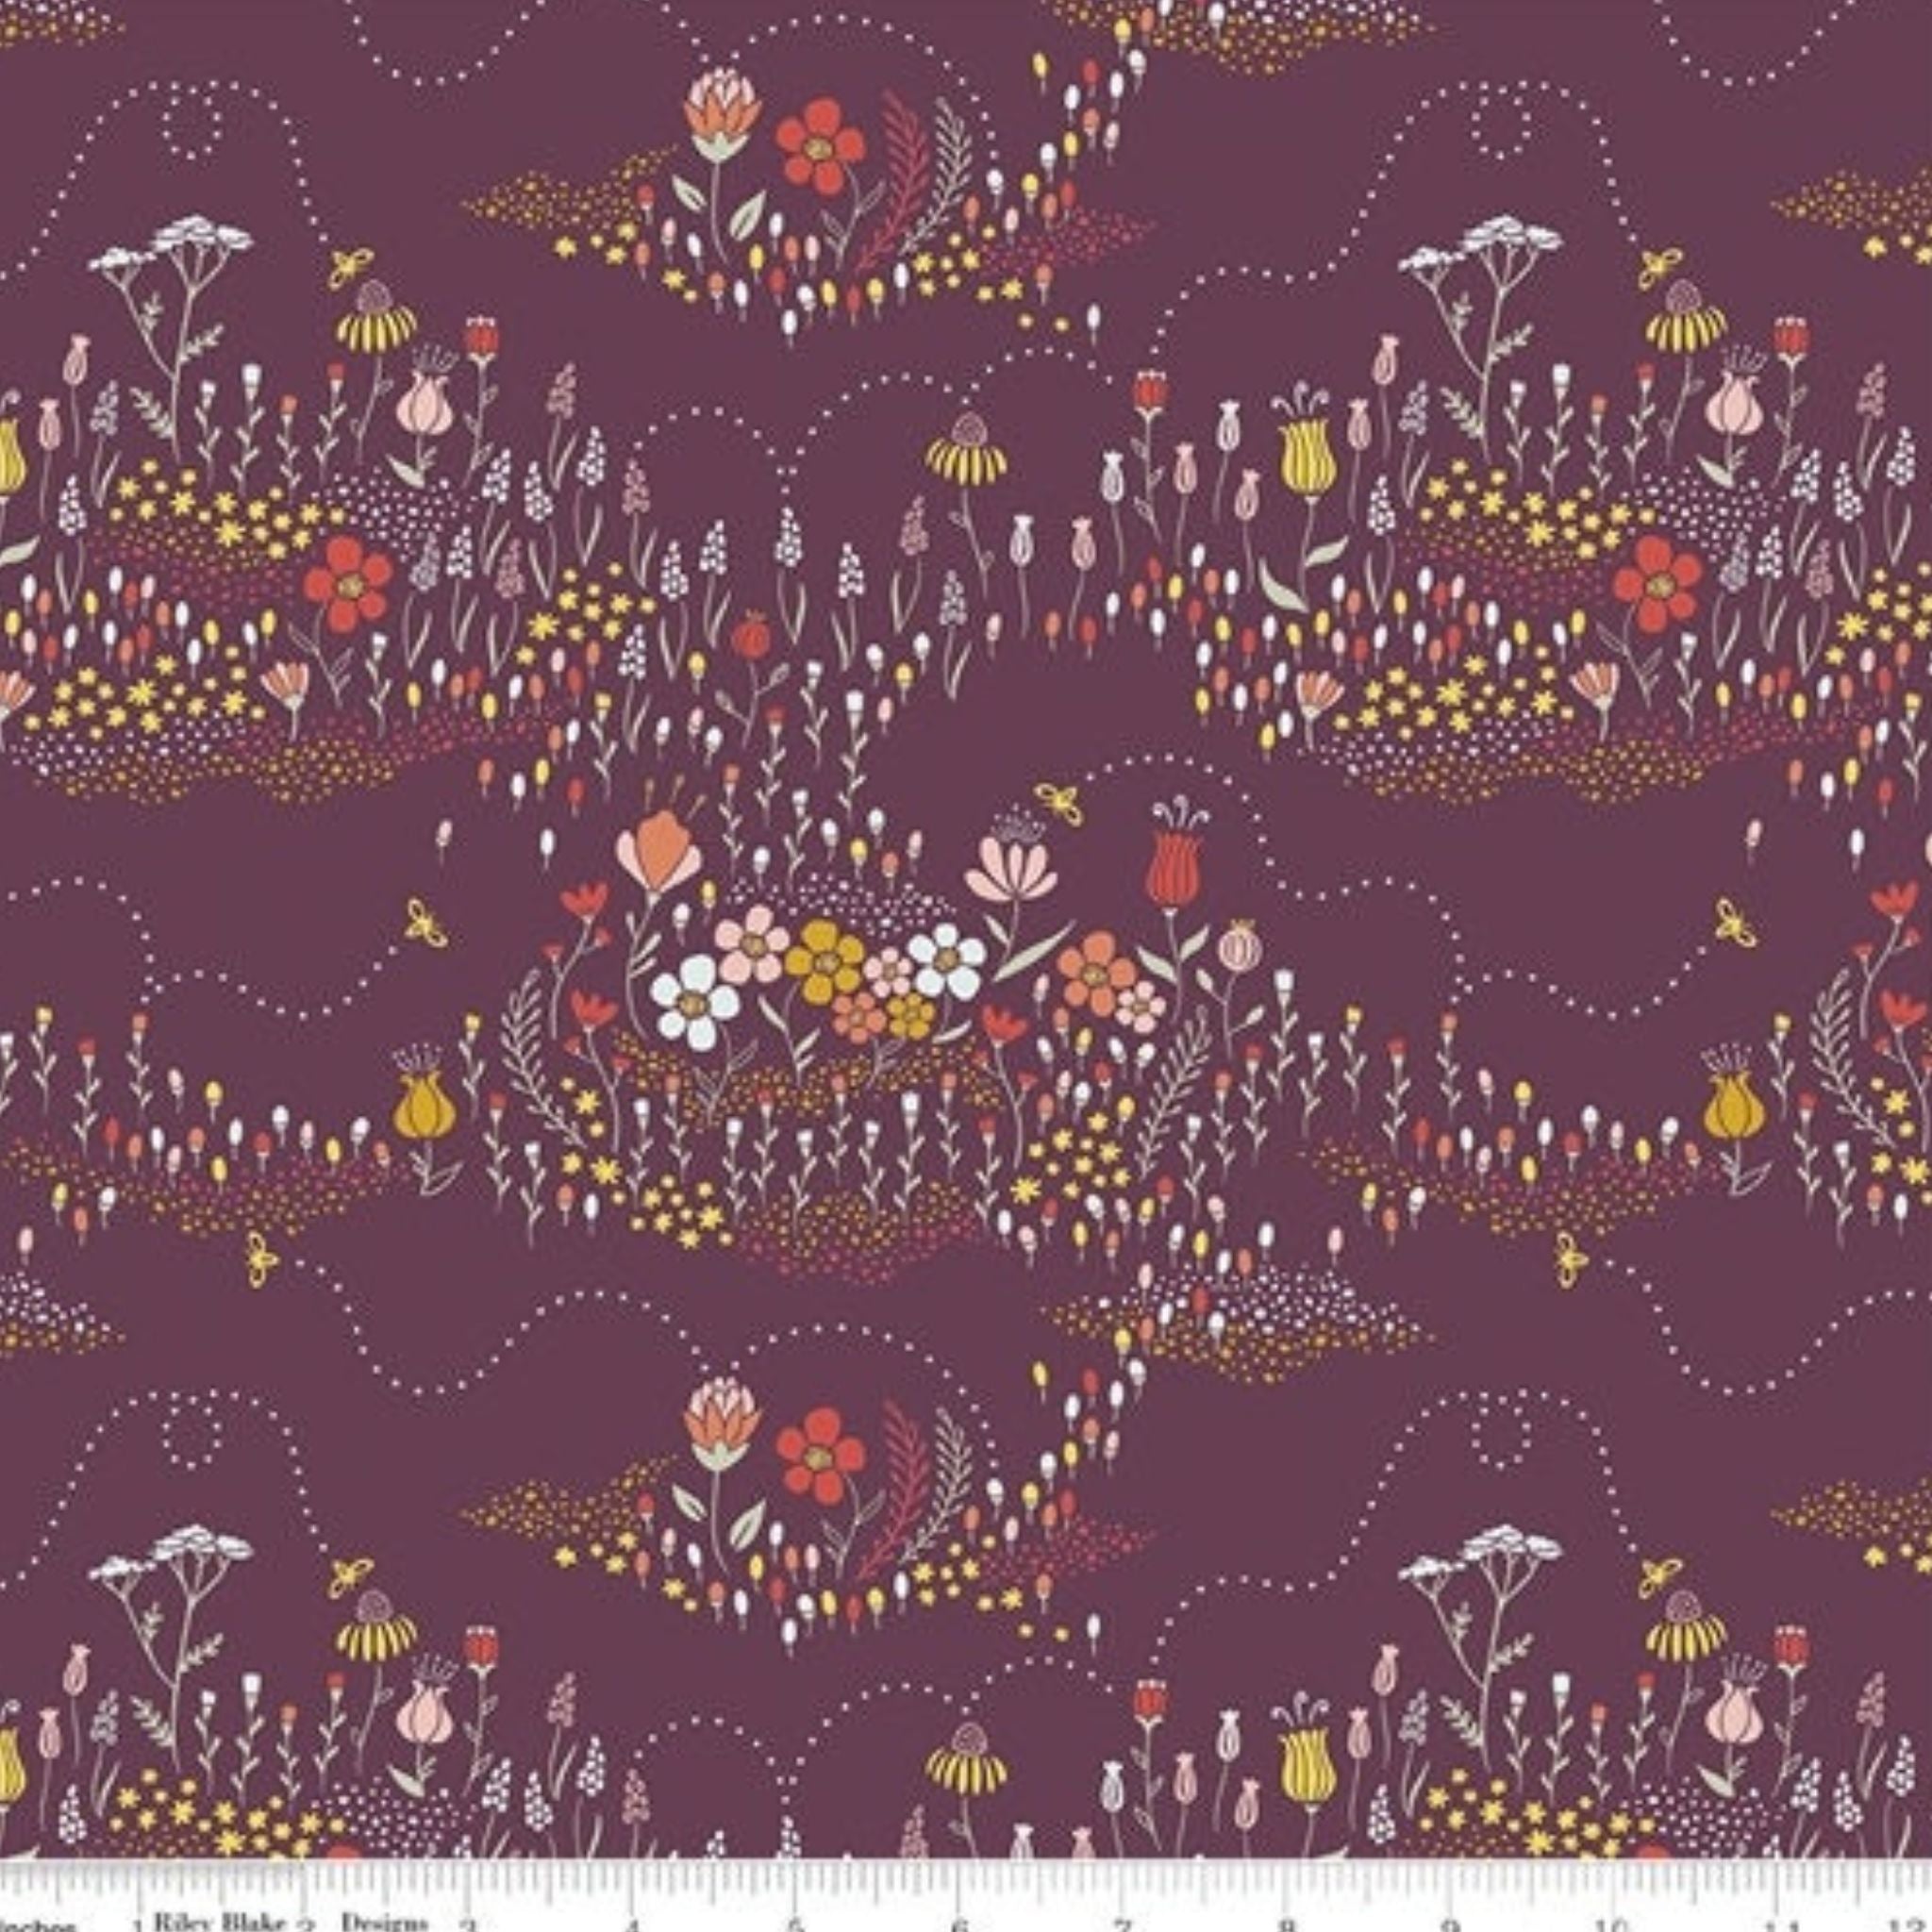 Bees on coral pink cotton fabric - Harmony by Riley Blake